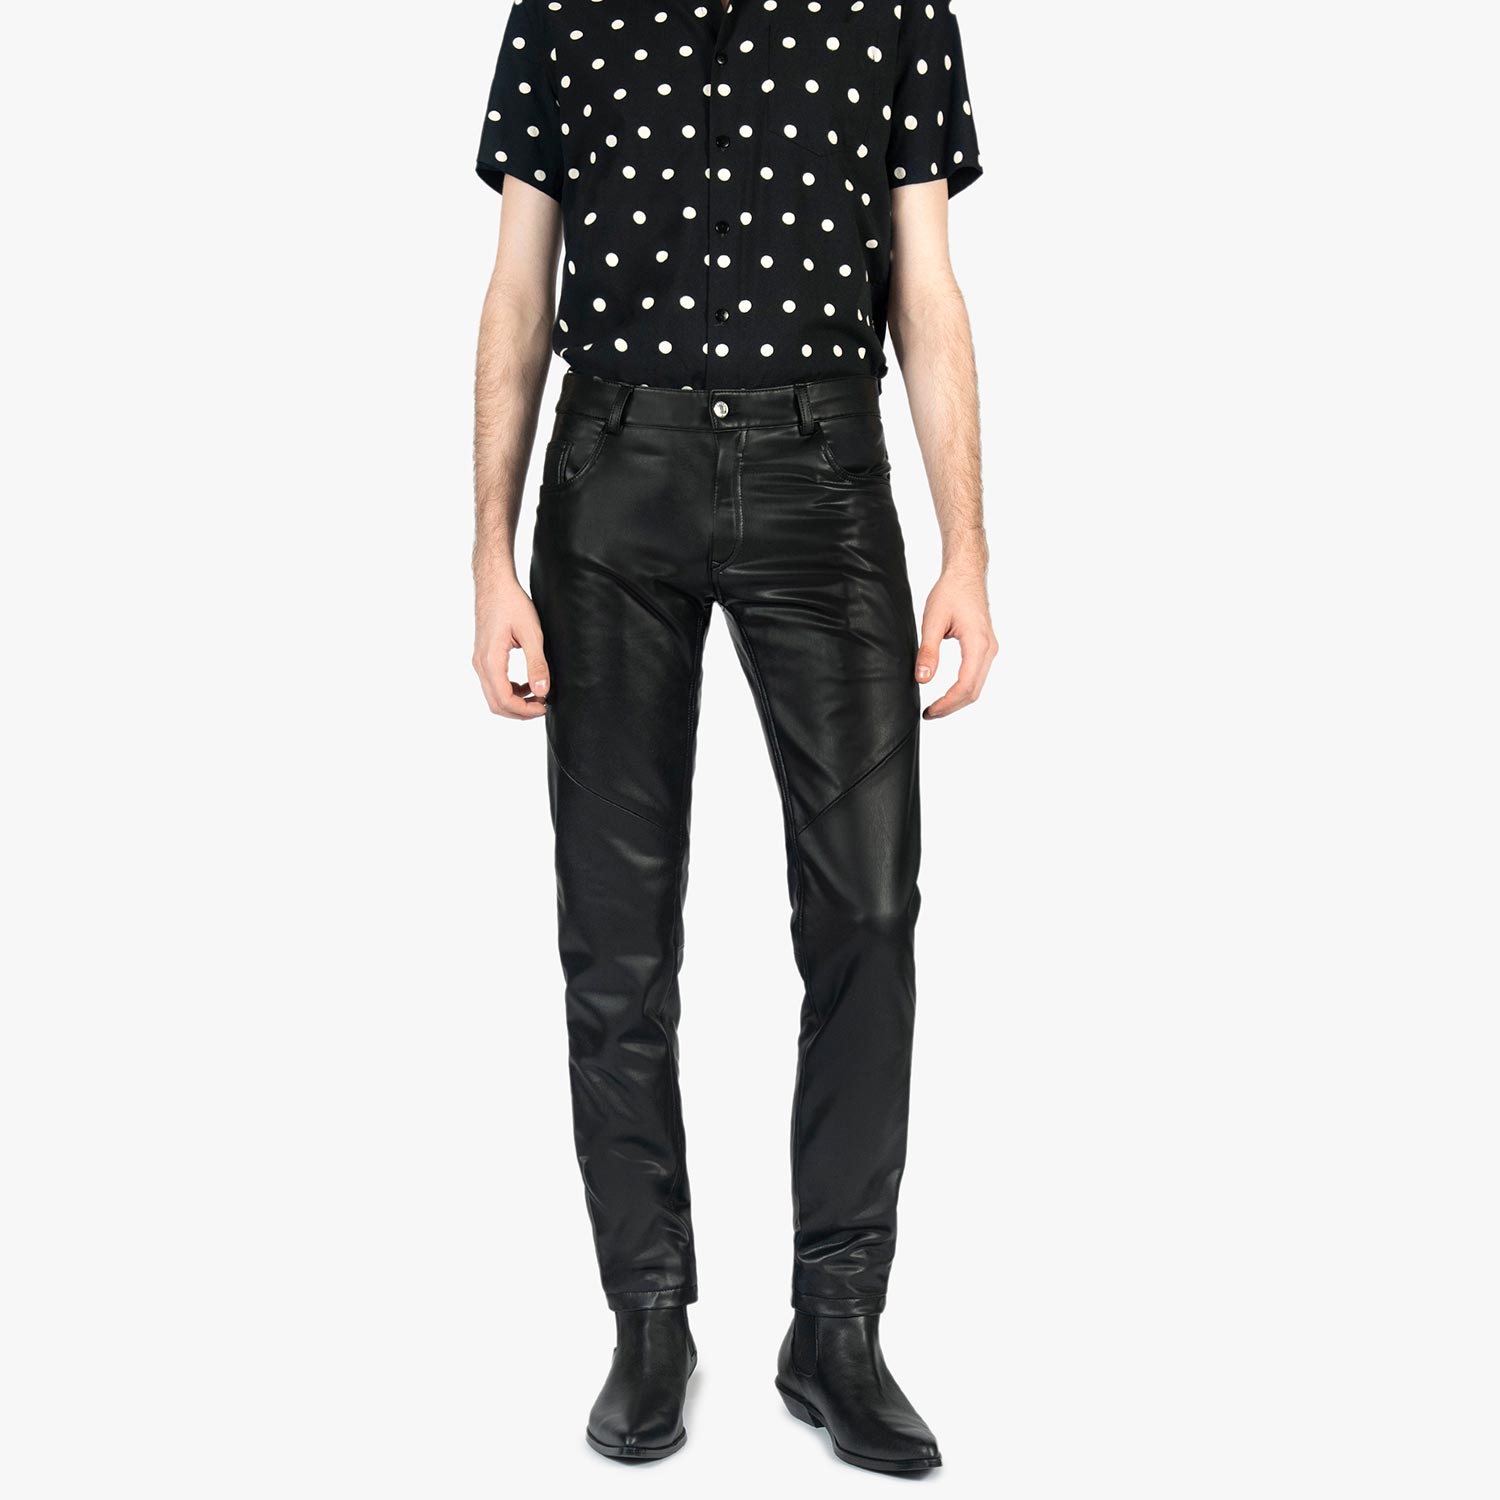 Skinny-fit stretch leather pants in black - Saint Laurent